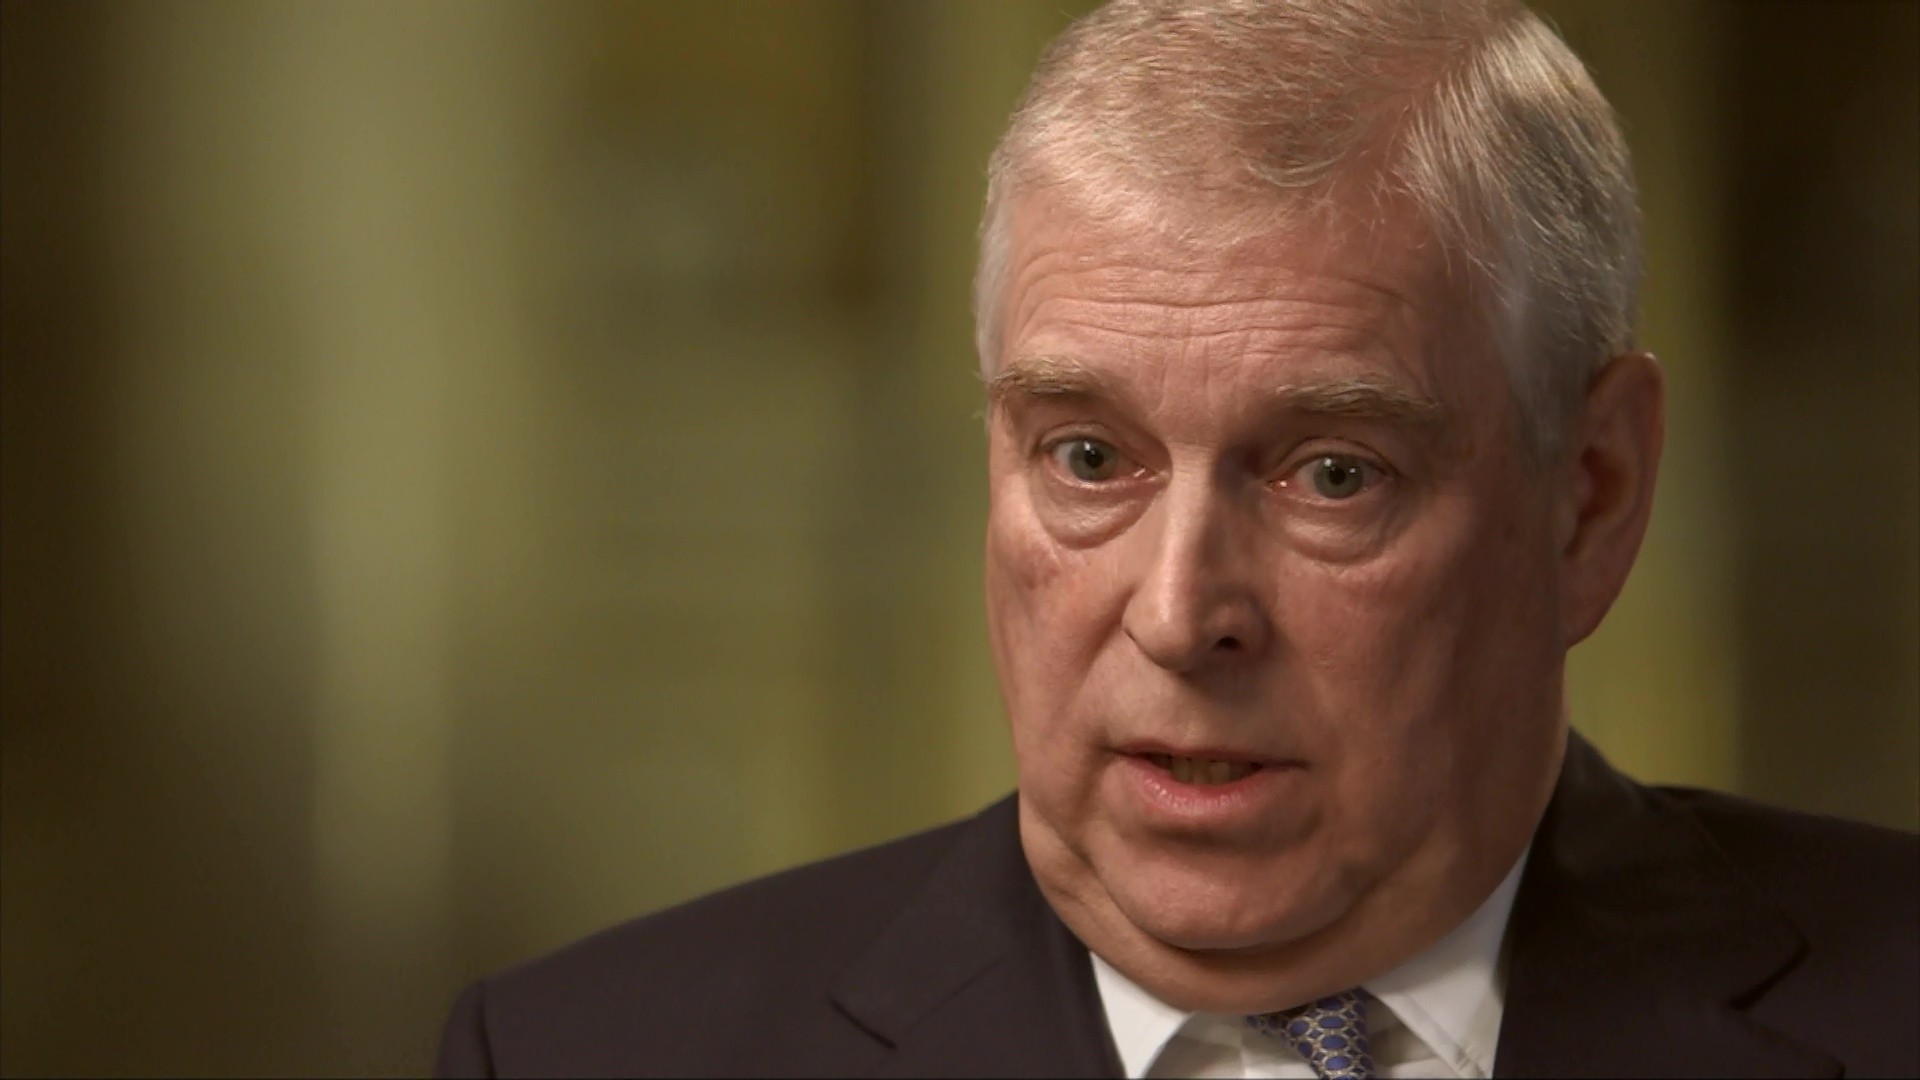 A top cop has called for Prince Andrew to be investigated